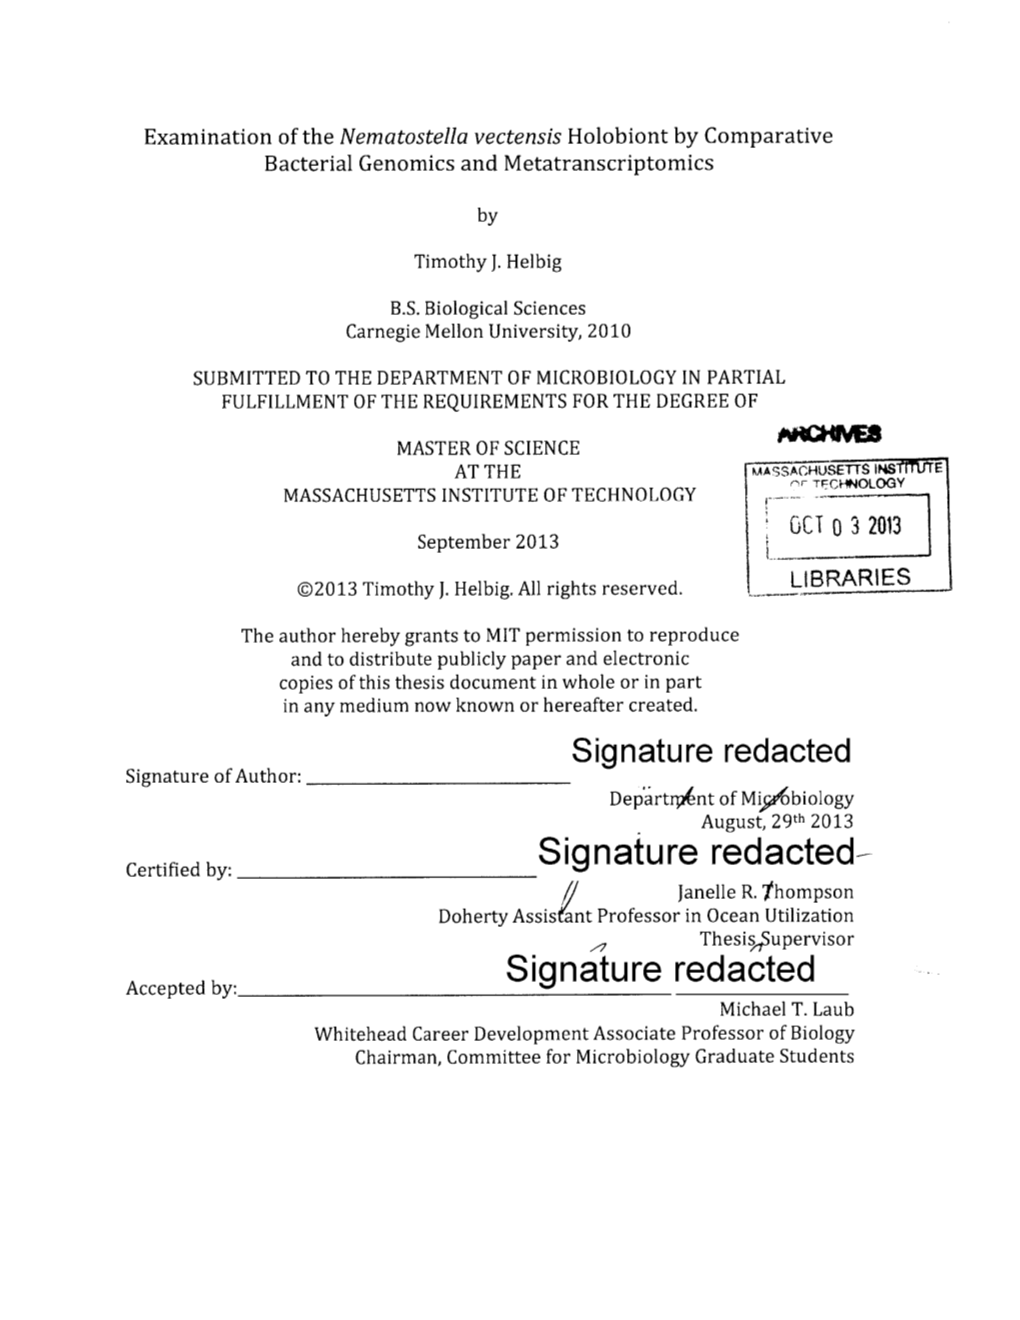 Signature Redacted Signature of Author: Dep Rtn, Nt of Miobiology August, 29Th 2013